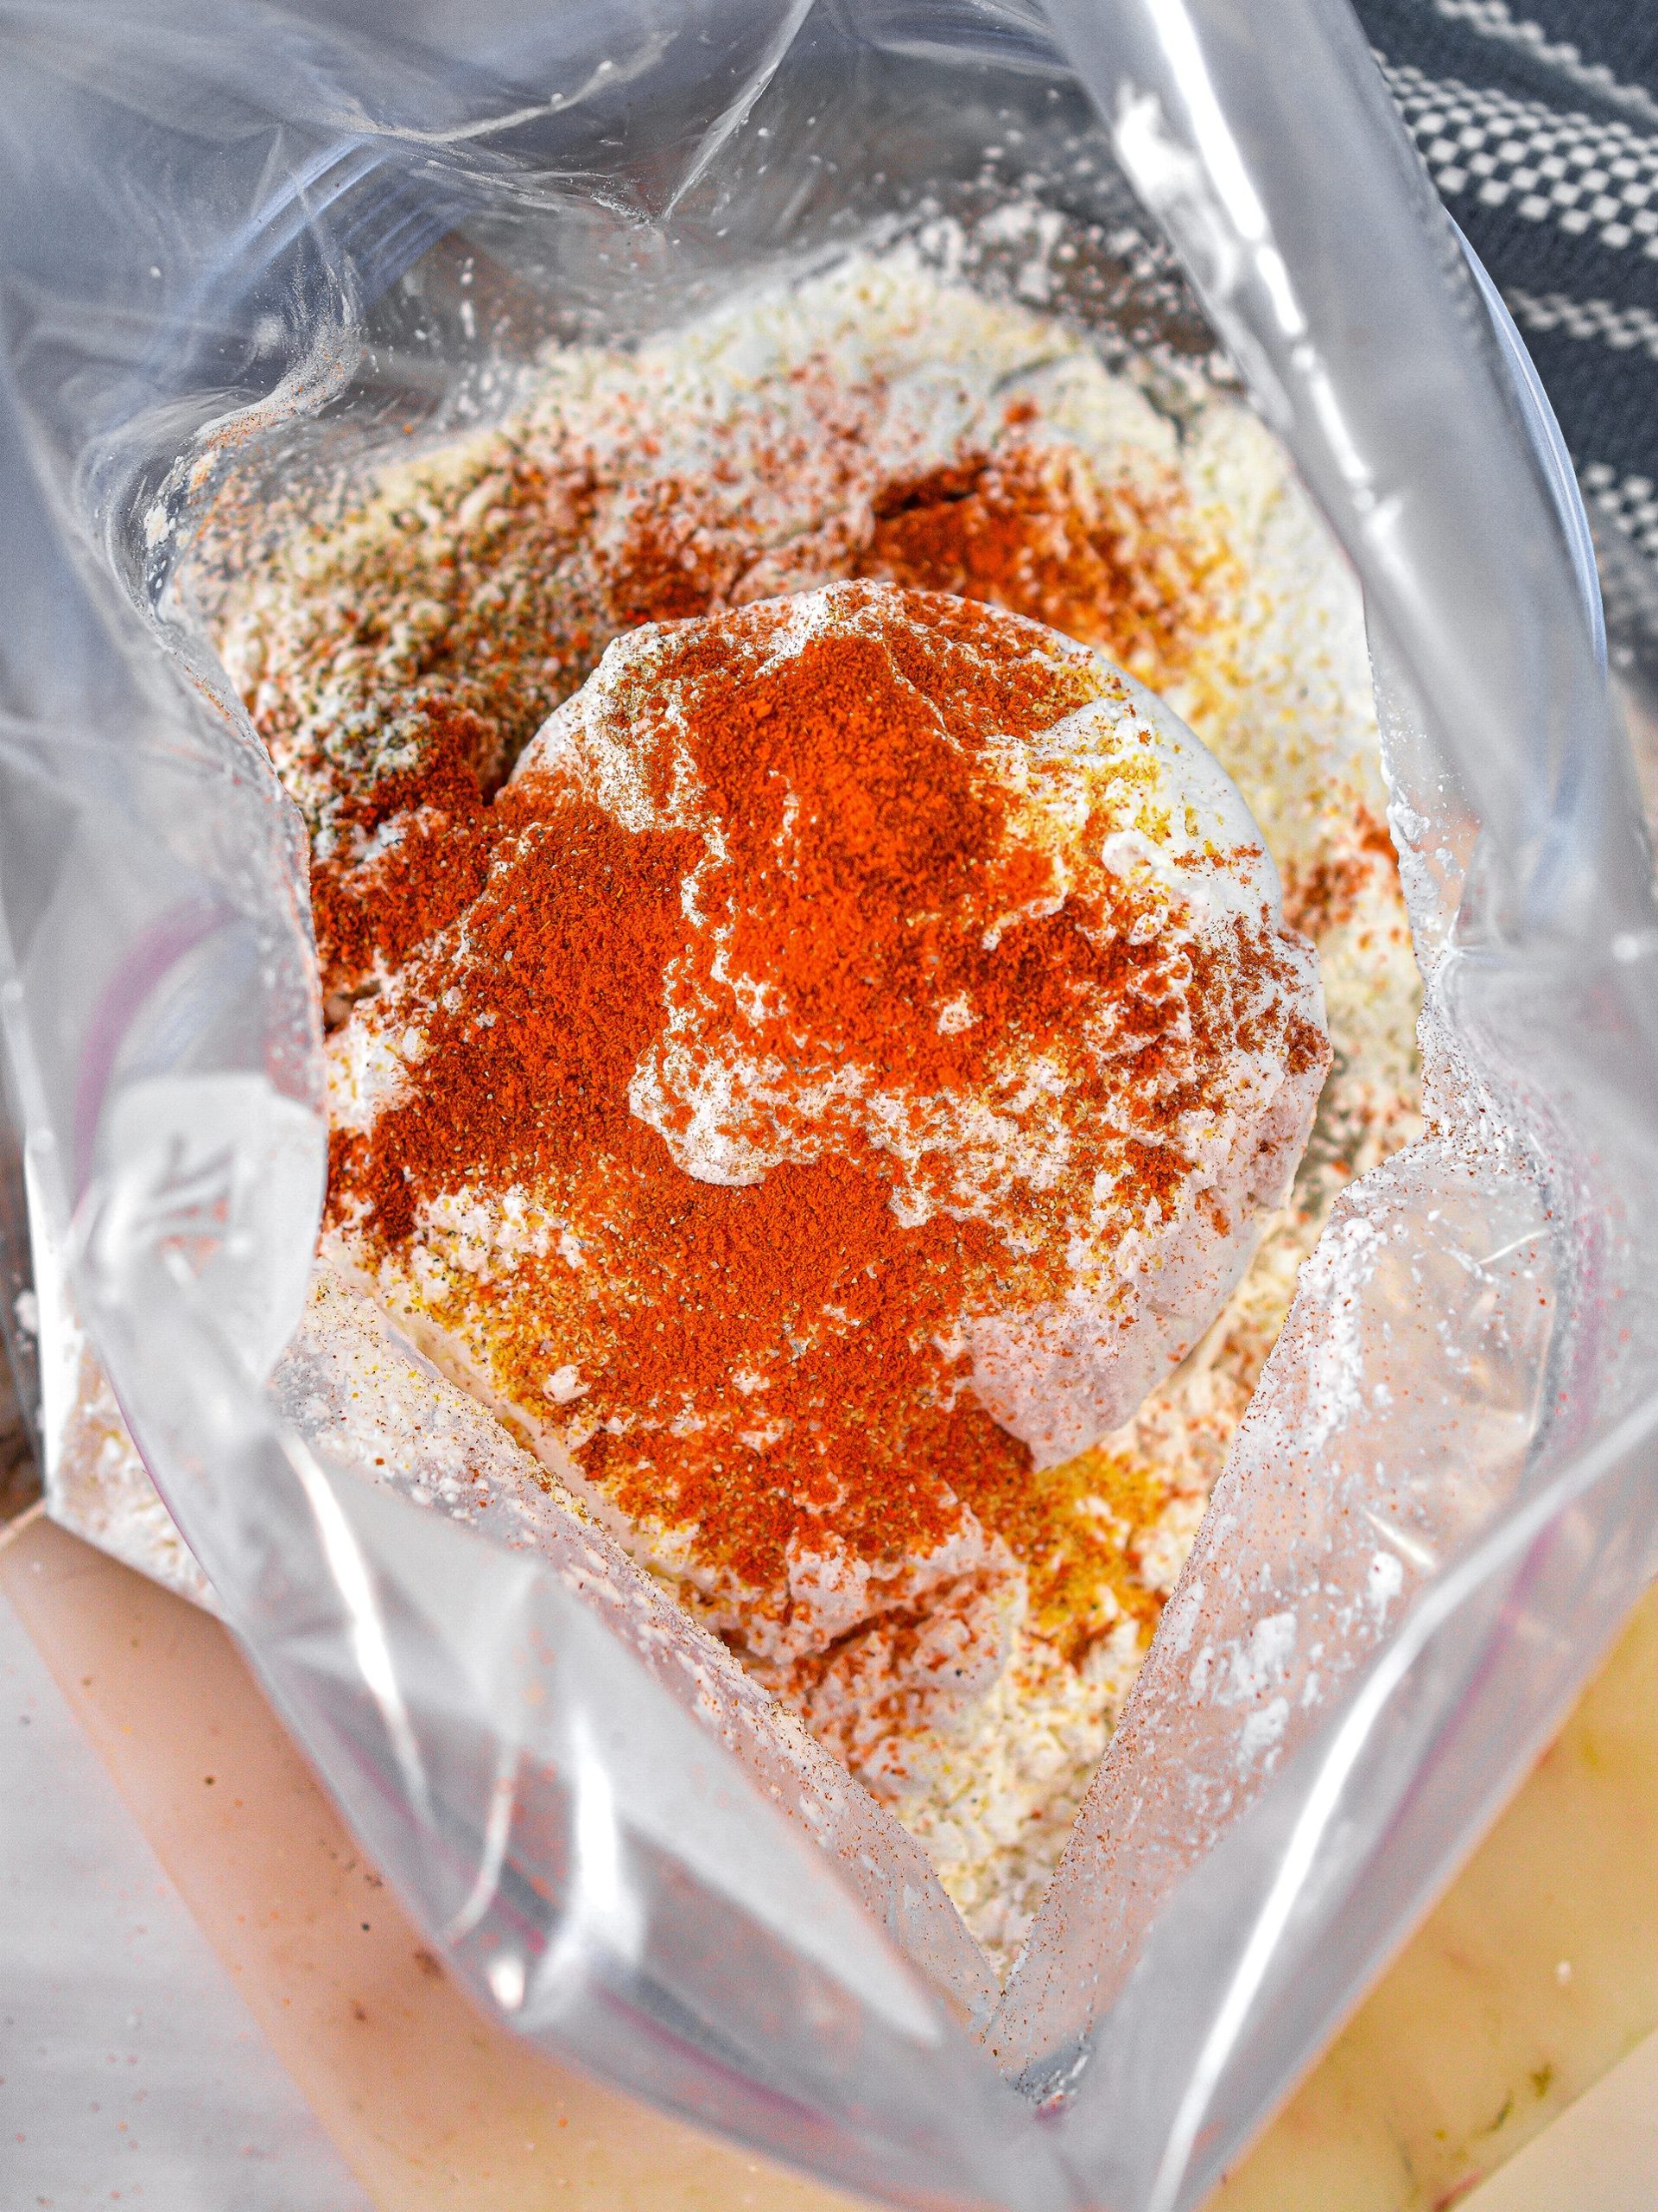 In a Ziploc bag, combine the flour, cornstarch and spices to taste. Shake to combine.